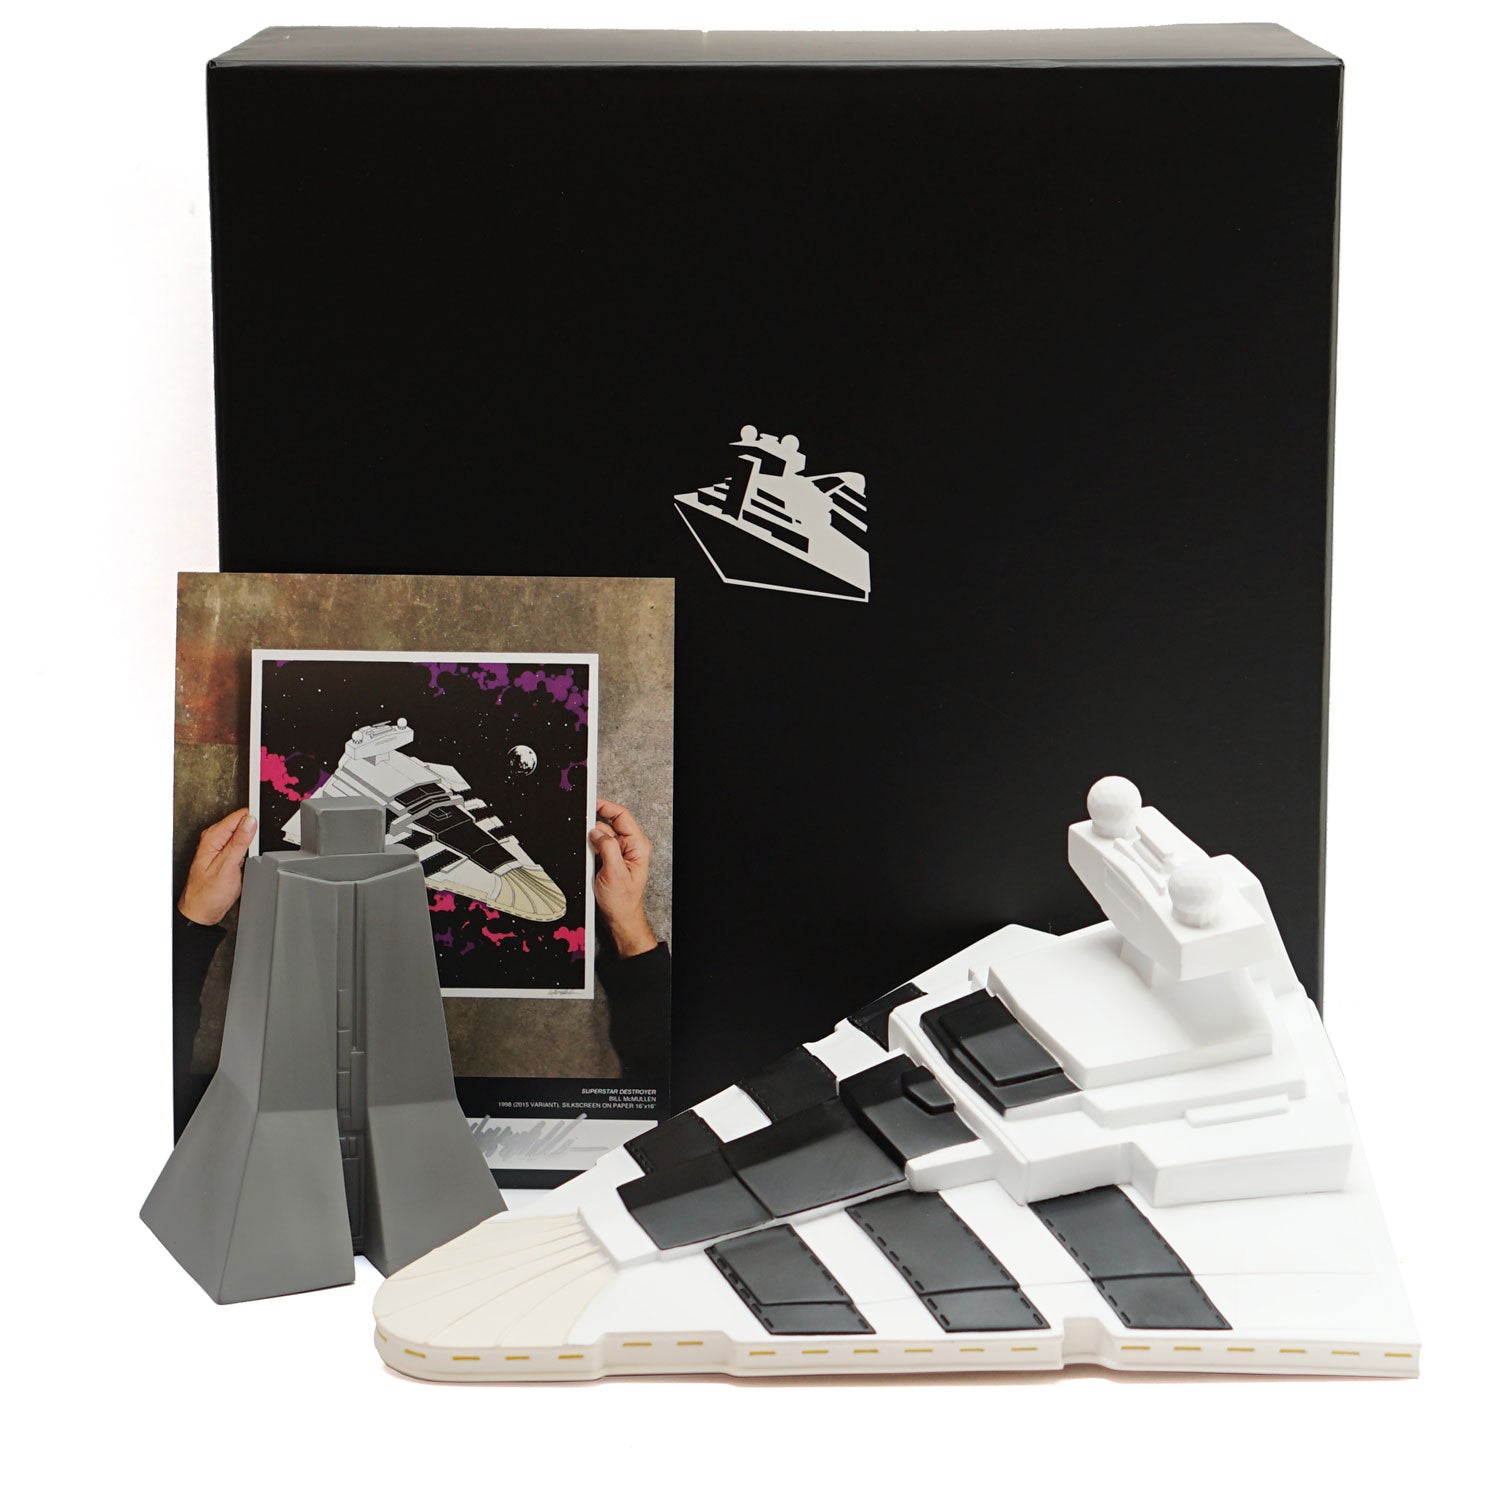 SuperStar Destroyer with Three Stripes 10-Inch Toy Figure by Billions